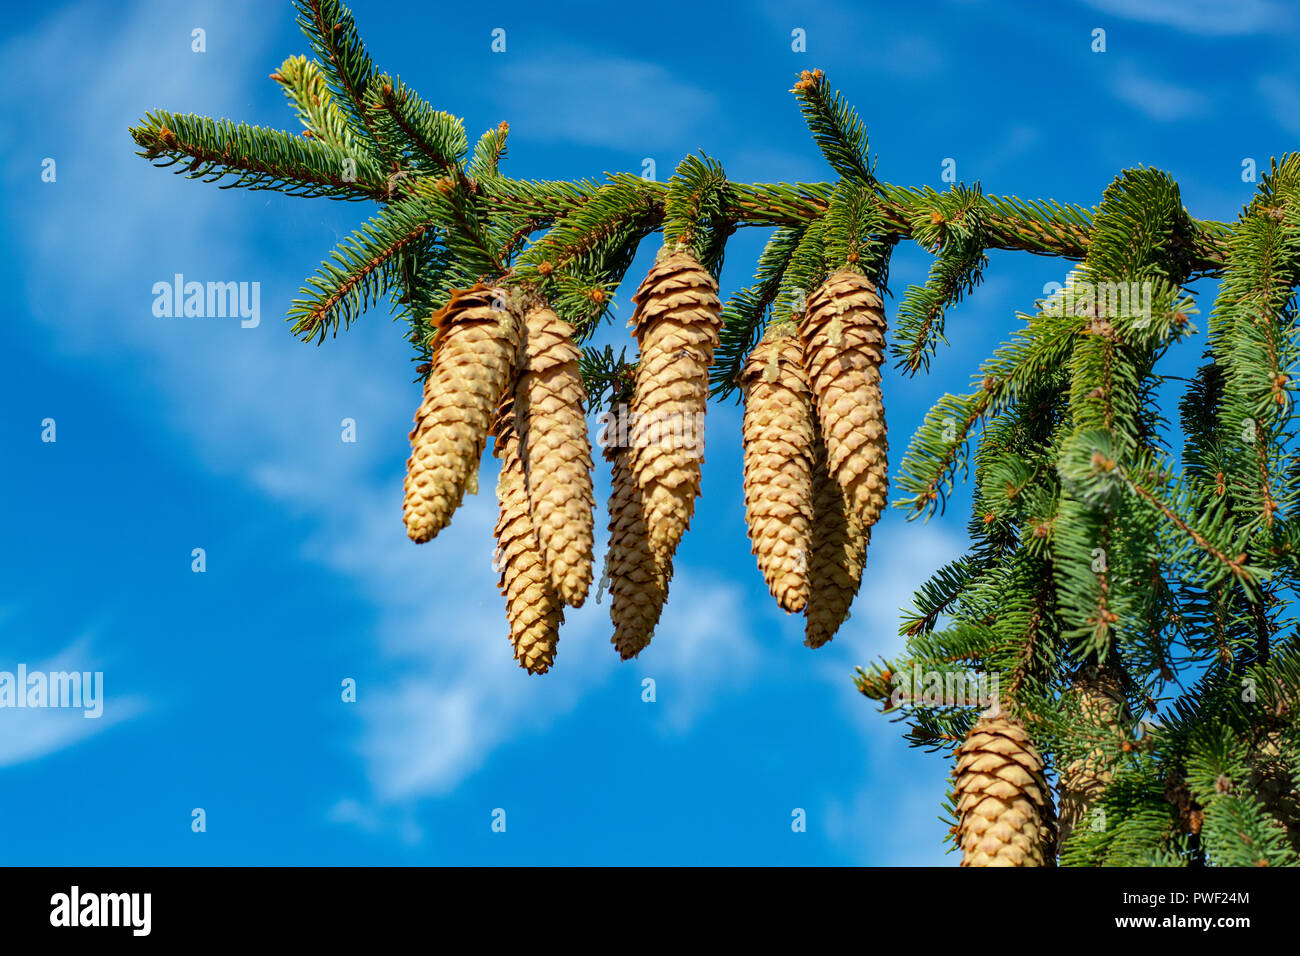 Picea schrenkiana evergreen fir tree with many long cones on blue sky background copy space Stock Photo